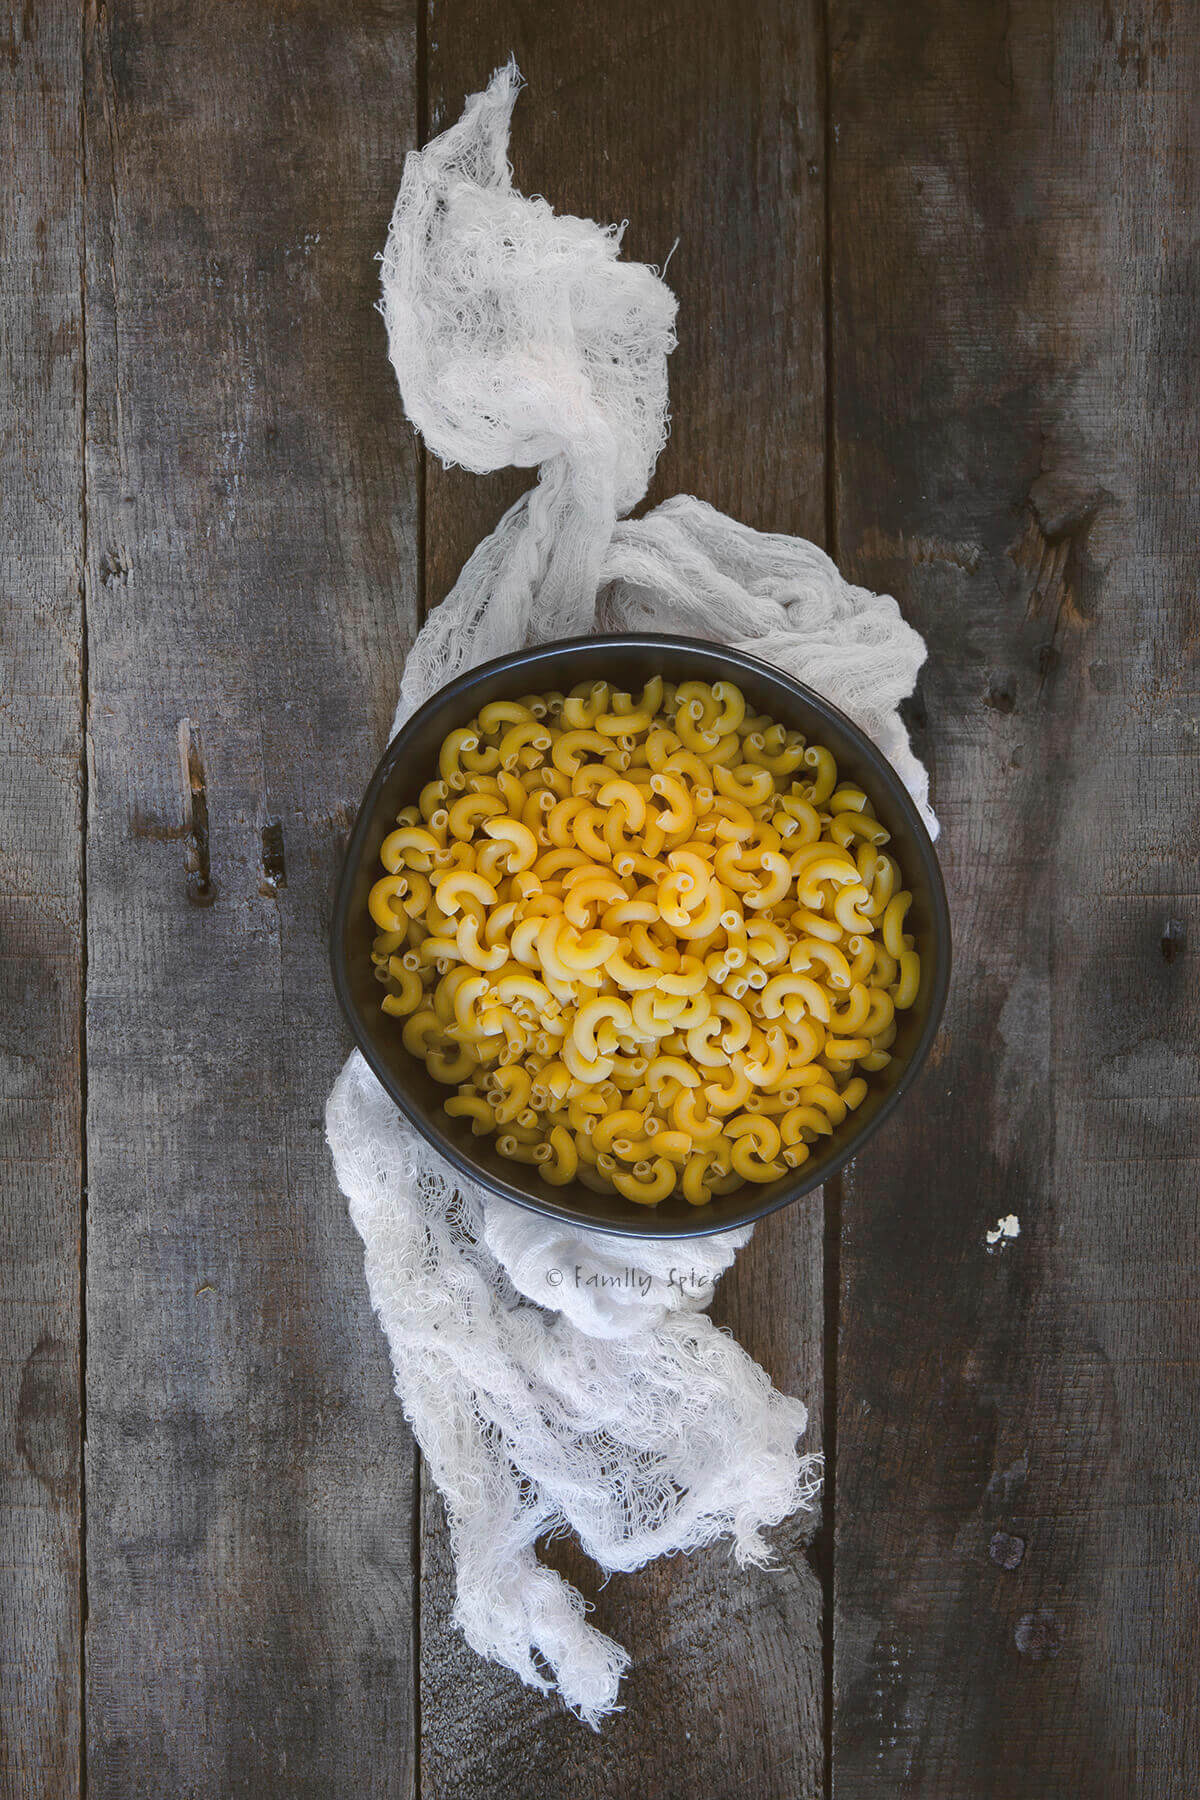 Top view of a bowl with uncooked macaroni in it